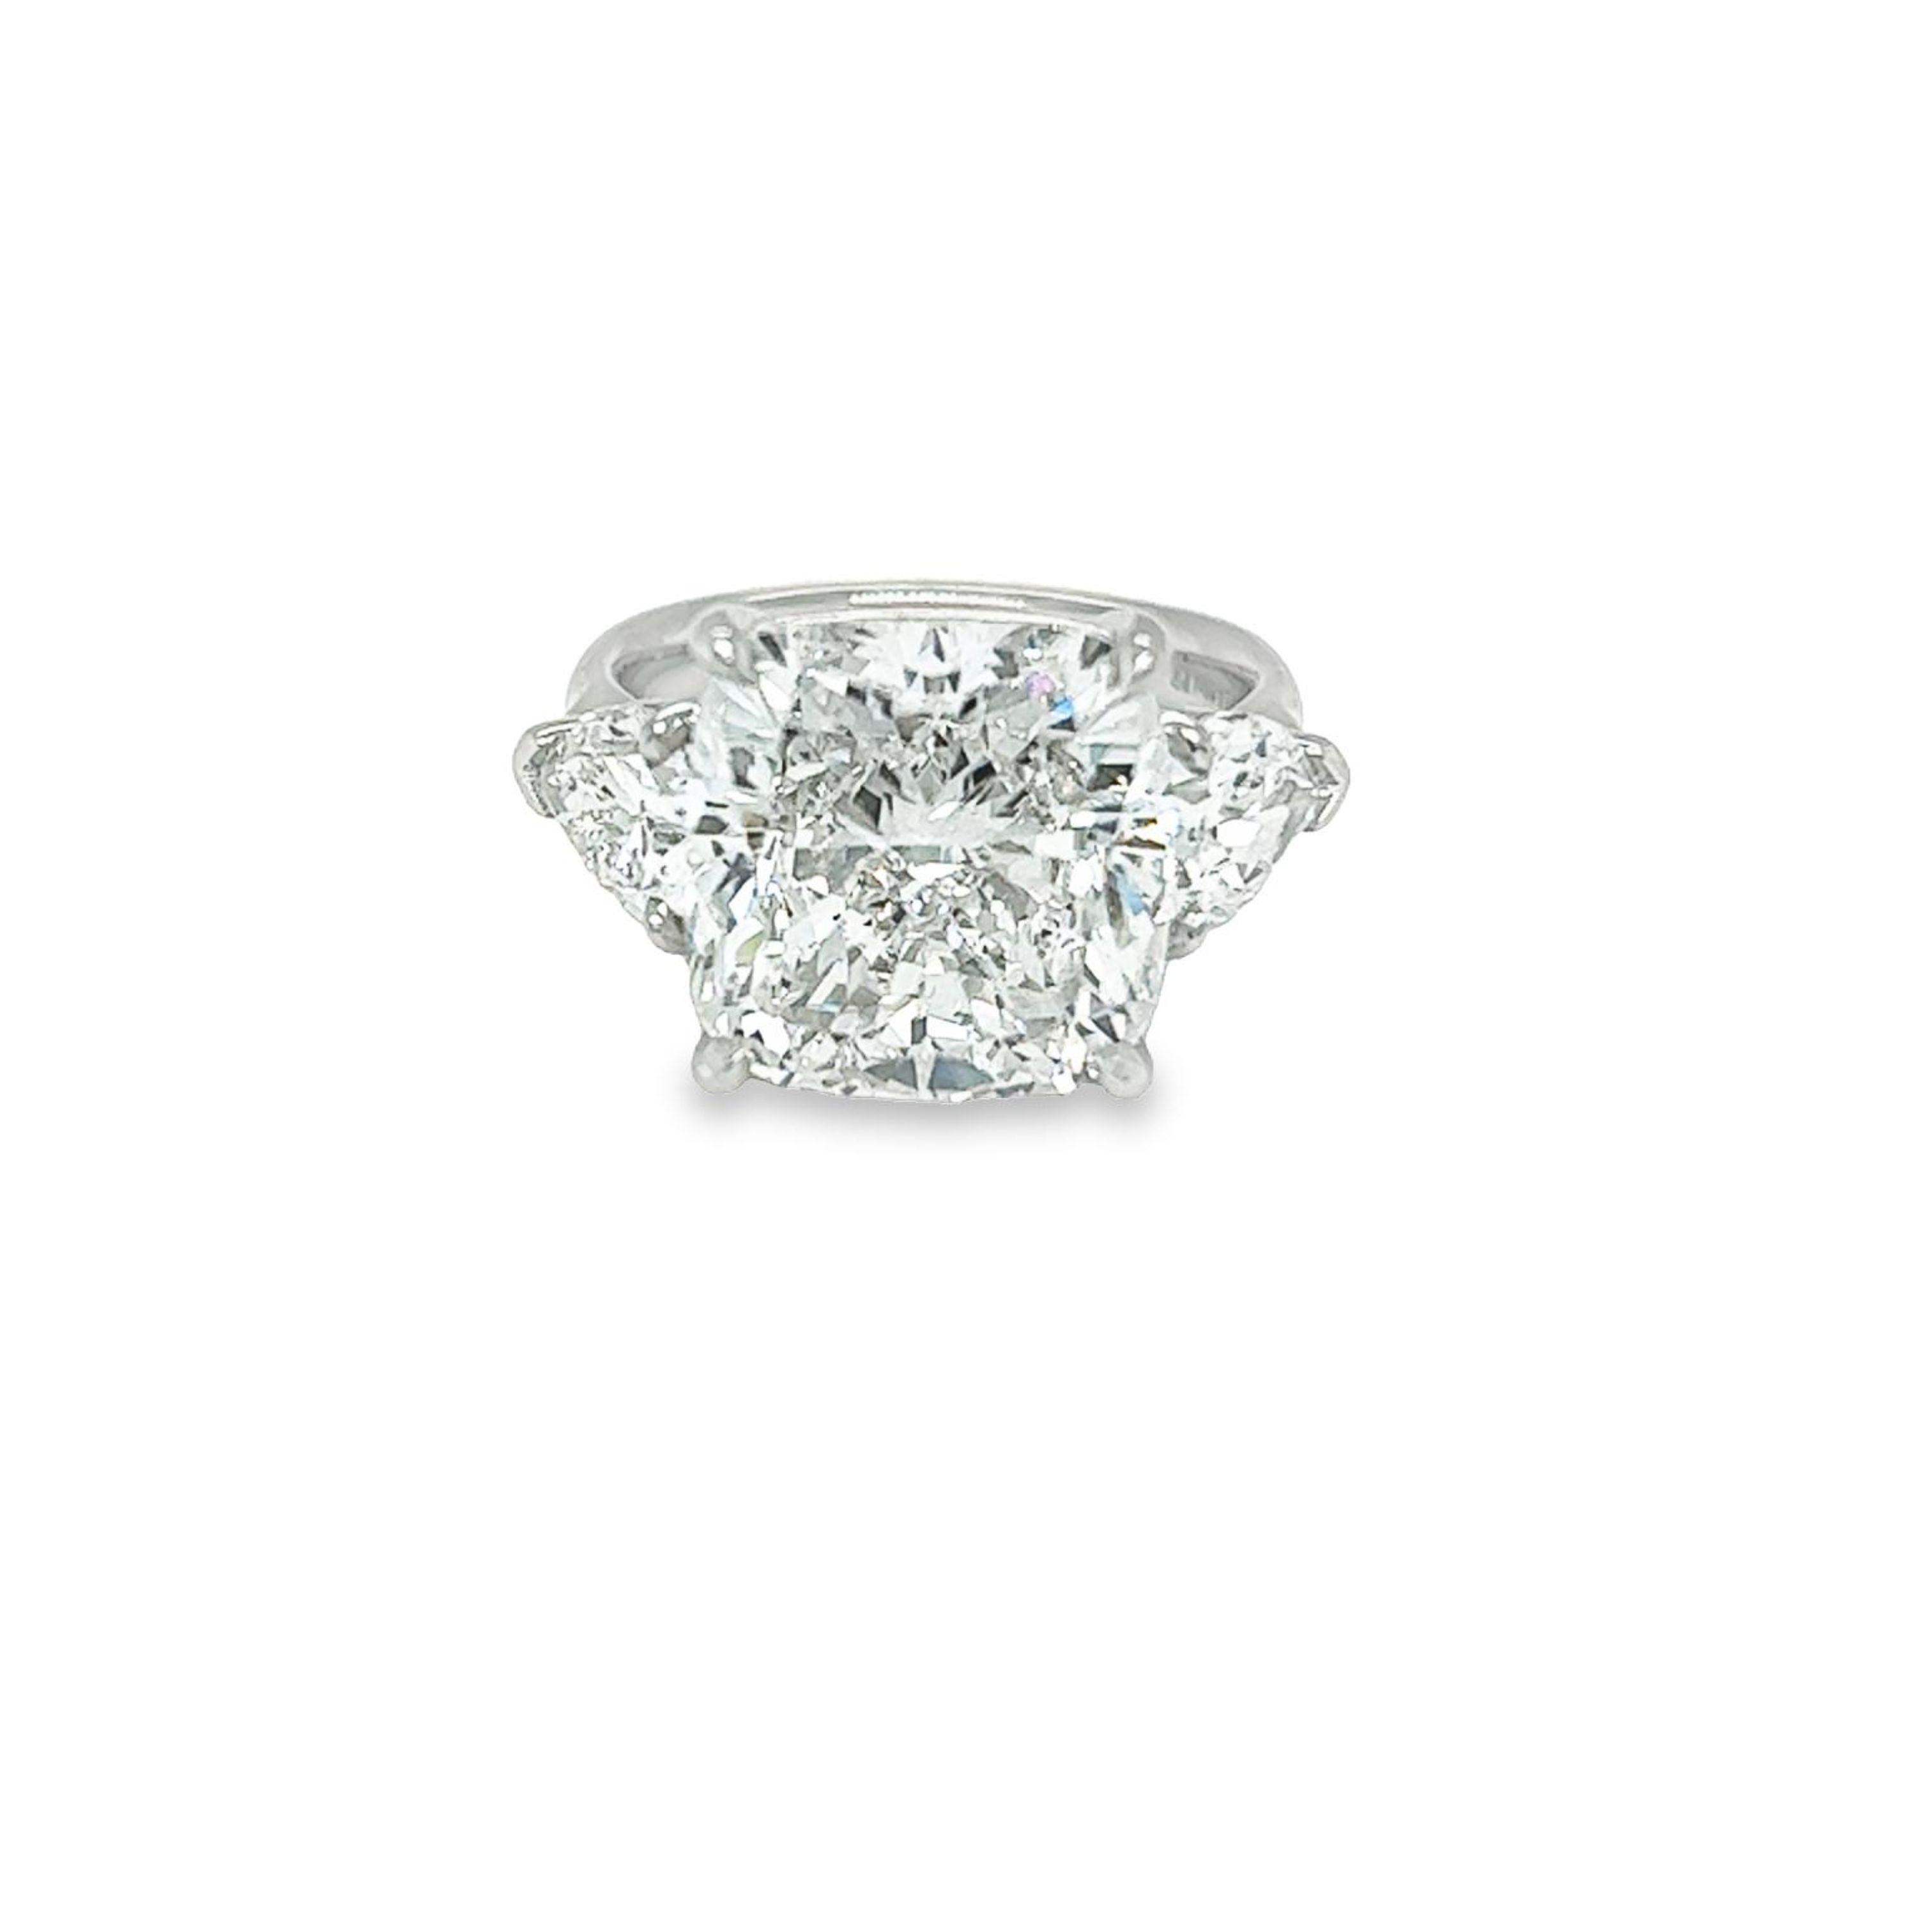 Rosenberg Diamonds & Co. 10.08 carat Cushion cut F color SI2 clarity is accompanied by a GIA certificate. This spectacular three stone cushion is set in a handmade platinum setting with perfectly matched pair of Pear shape side stones flanking on